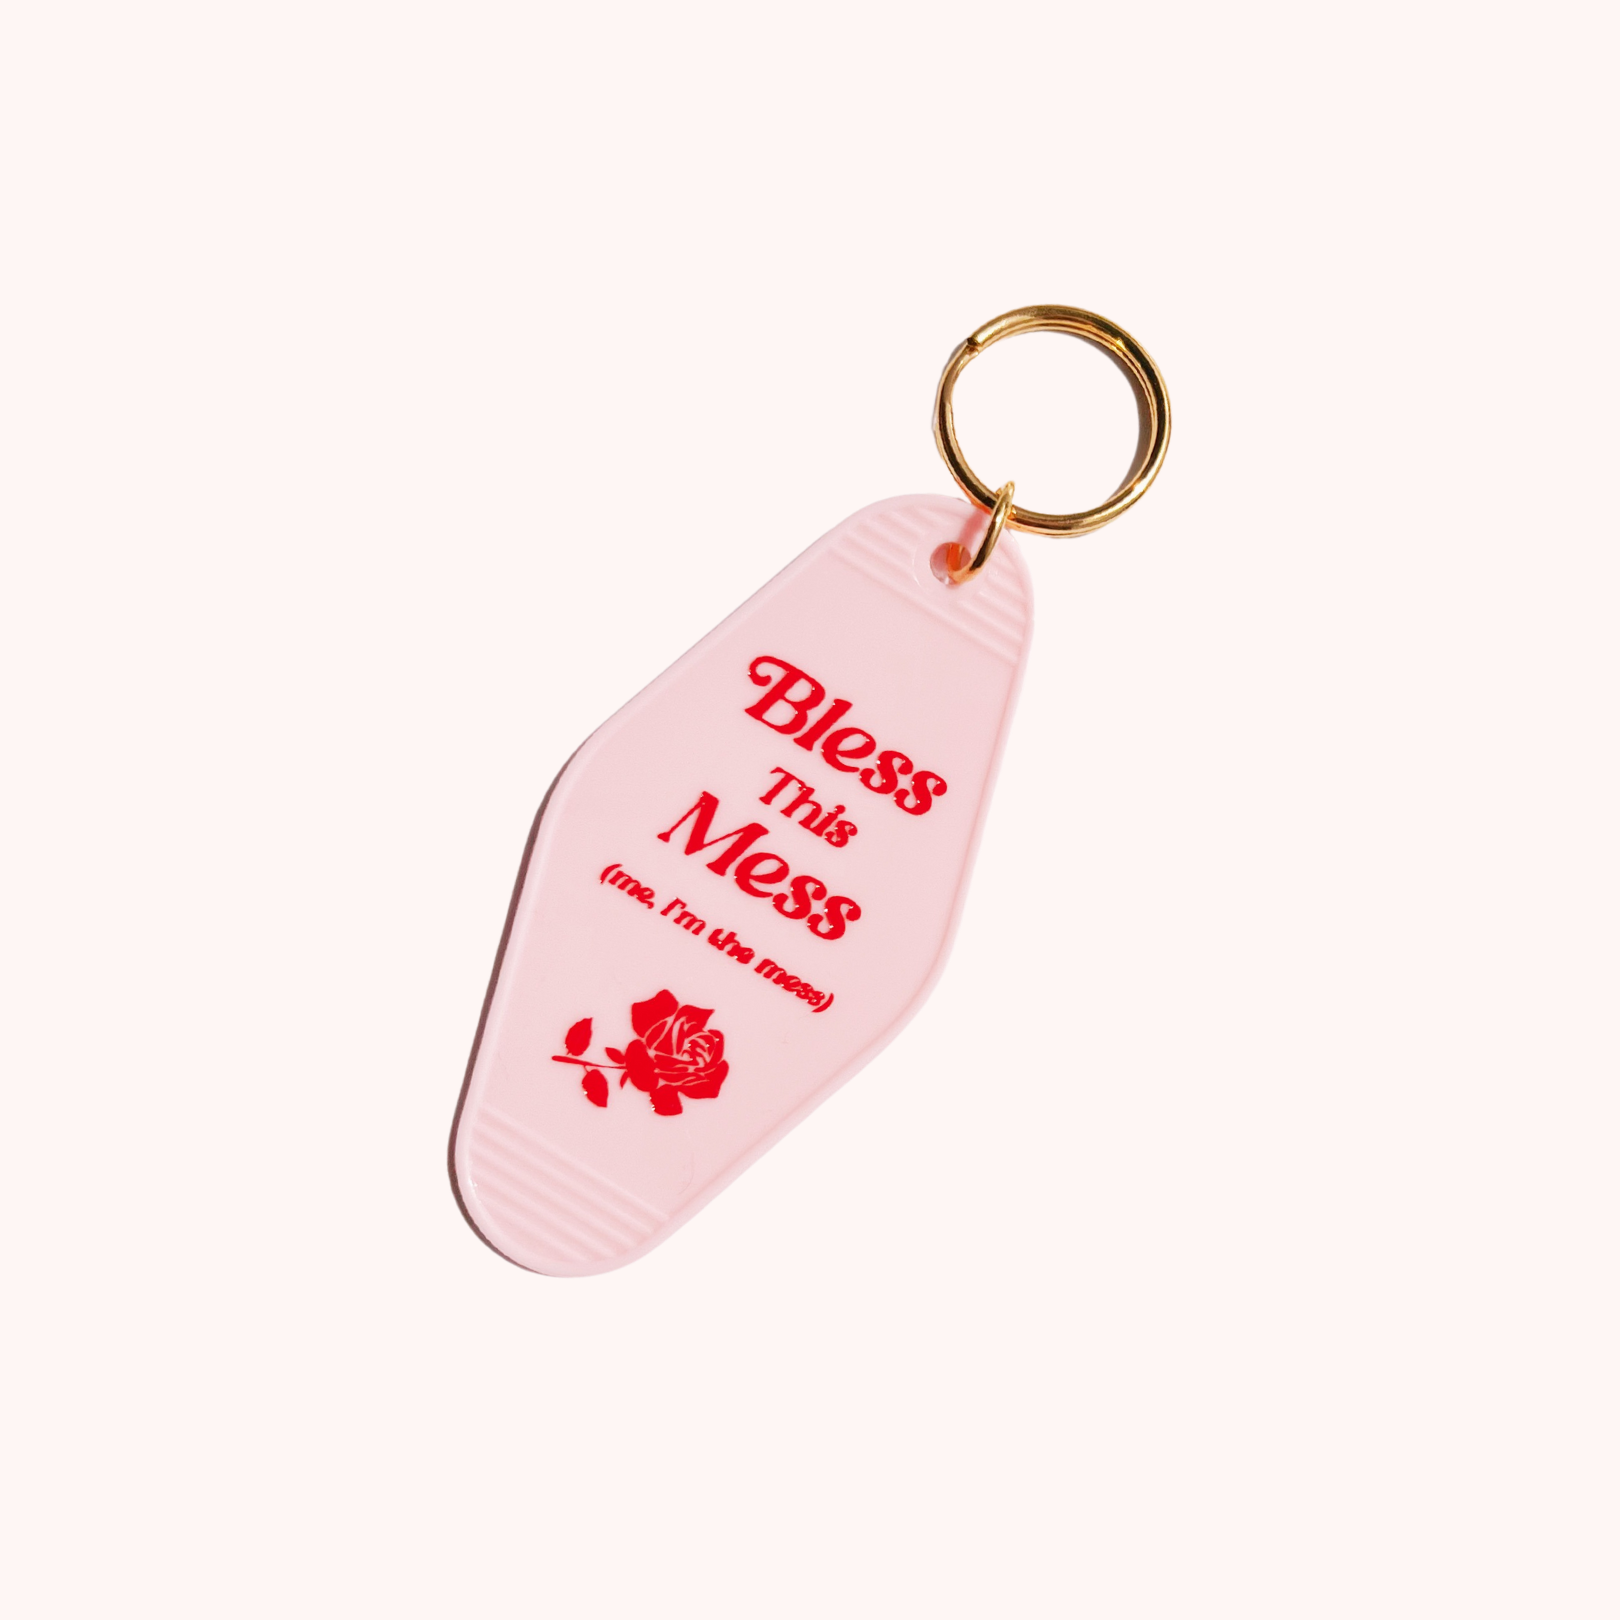 Bless This Mess Motel Tag Keychain